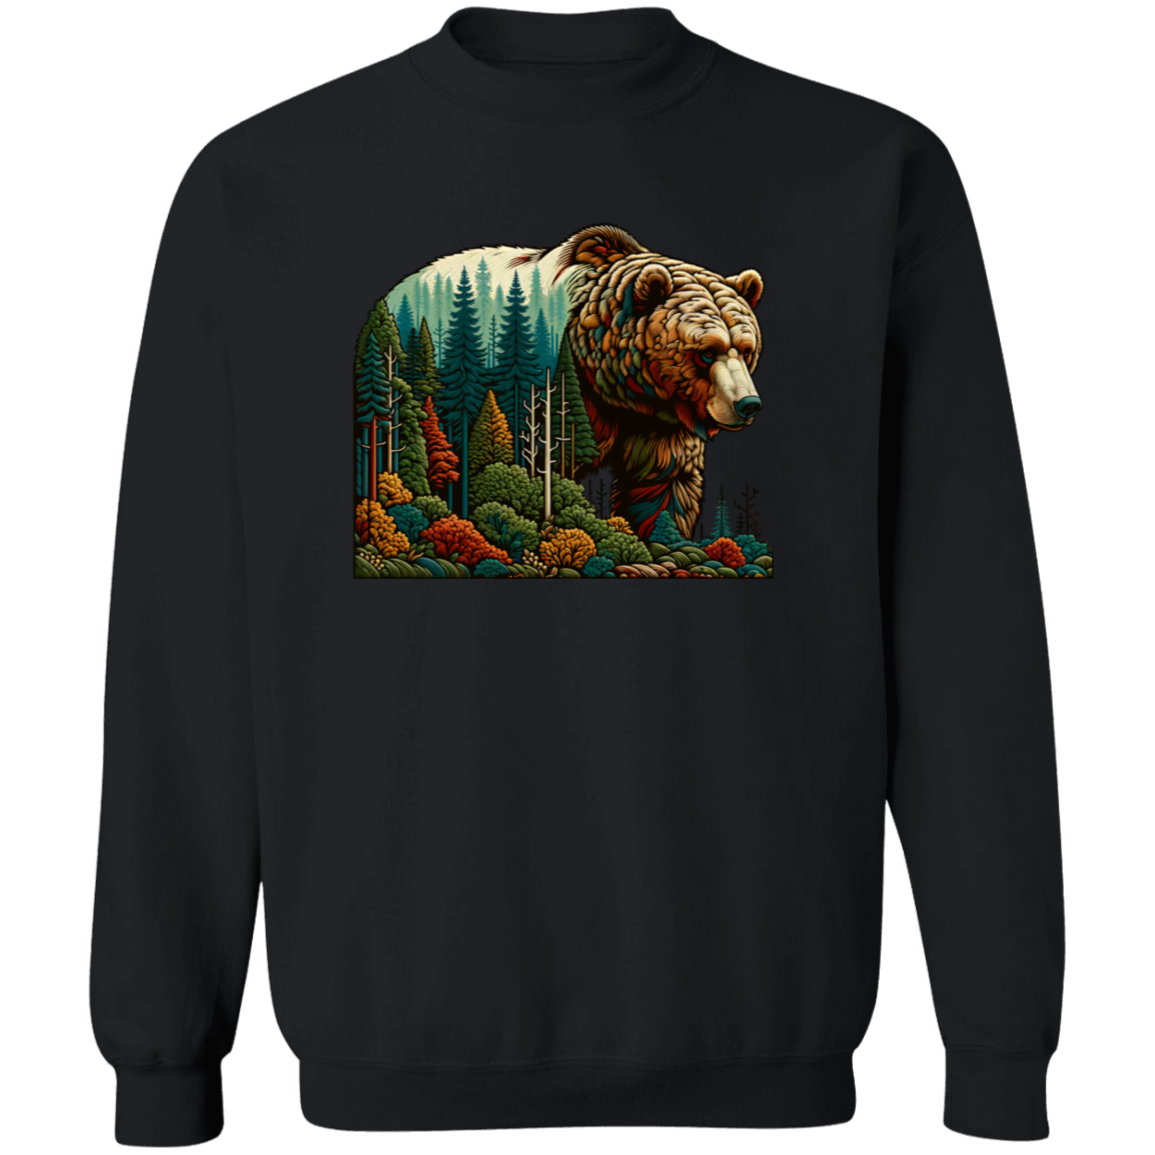 Guardian Grizzly - T-shirts, Hoodies and Sweatshirts